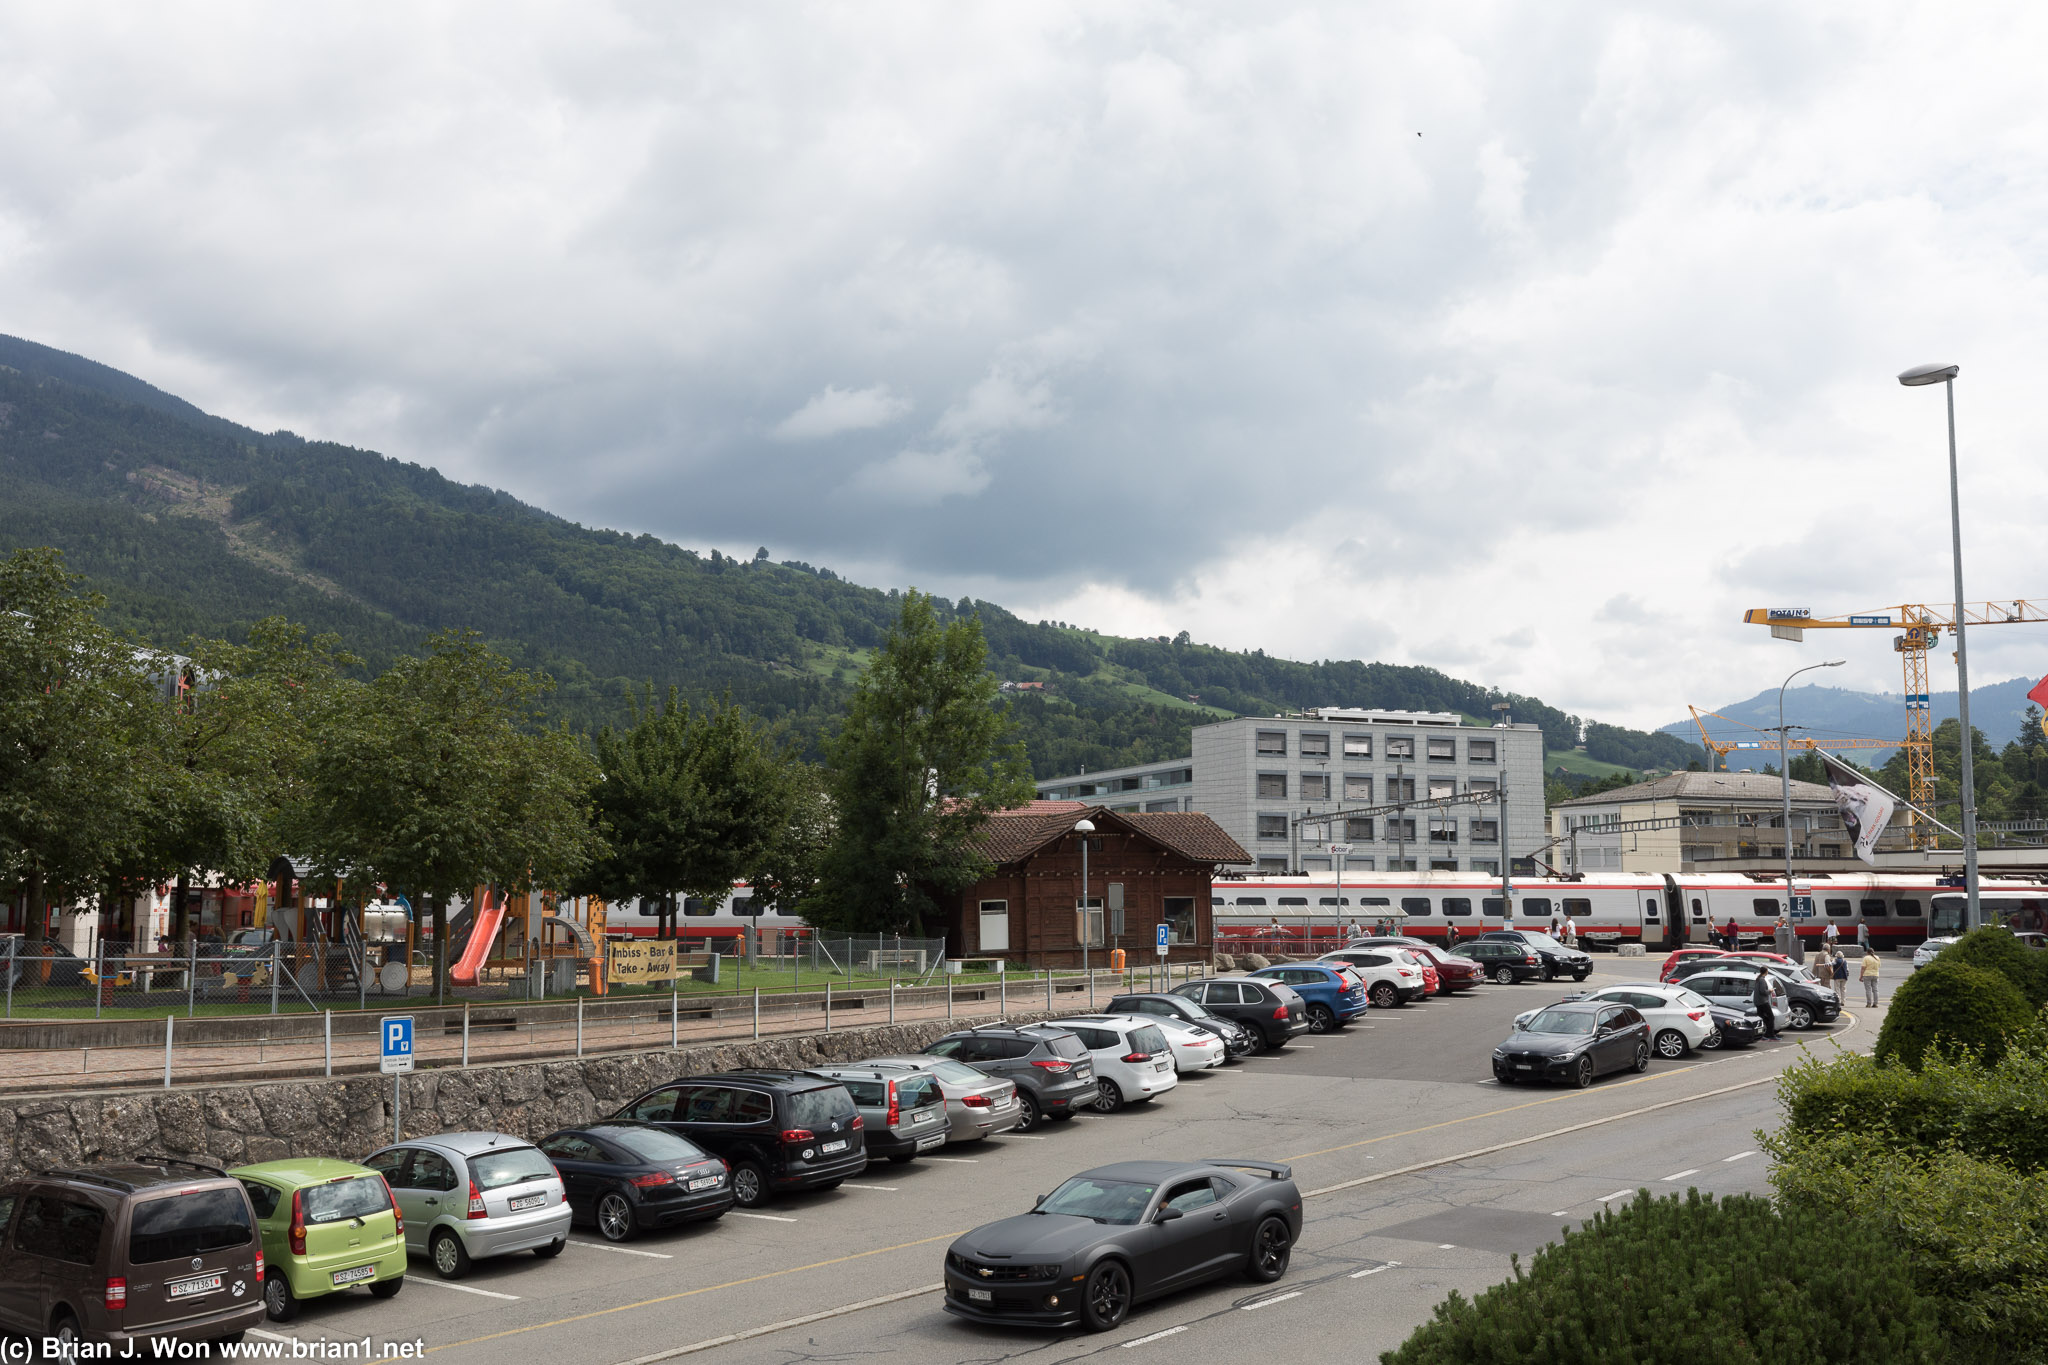 Arth-Goldau train station. We thought there'd be more parking...